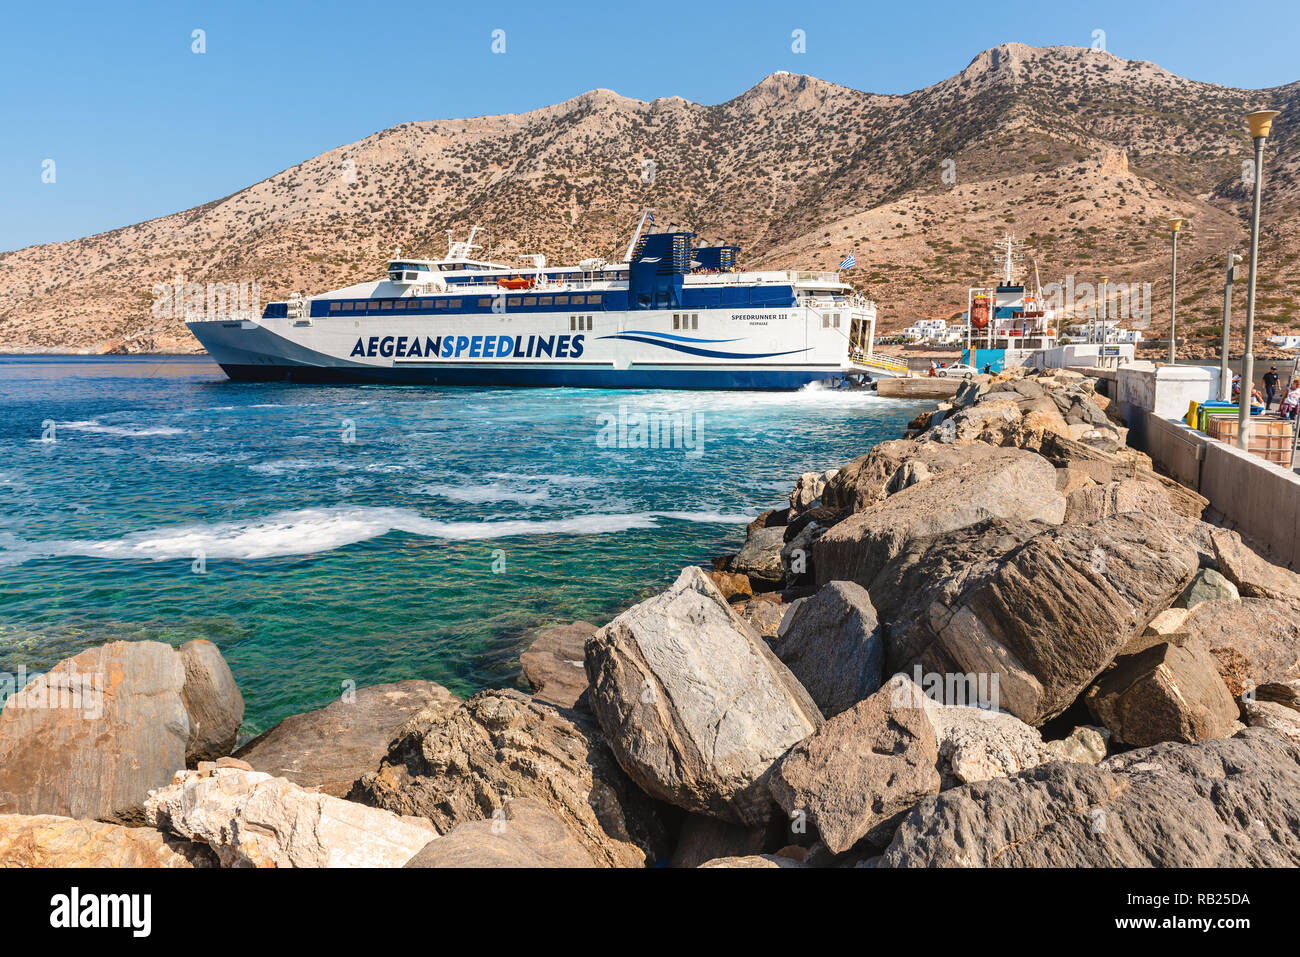 SIFNOS, GREECE - September 10, 2018: Speed Runner III ferry boat arrived at port of Kamaresi town in Sifnos Greece. Stock Photo